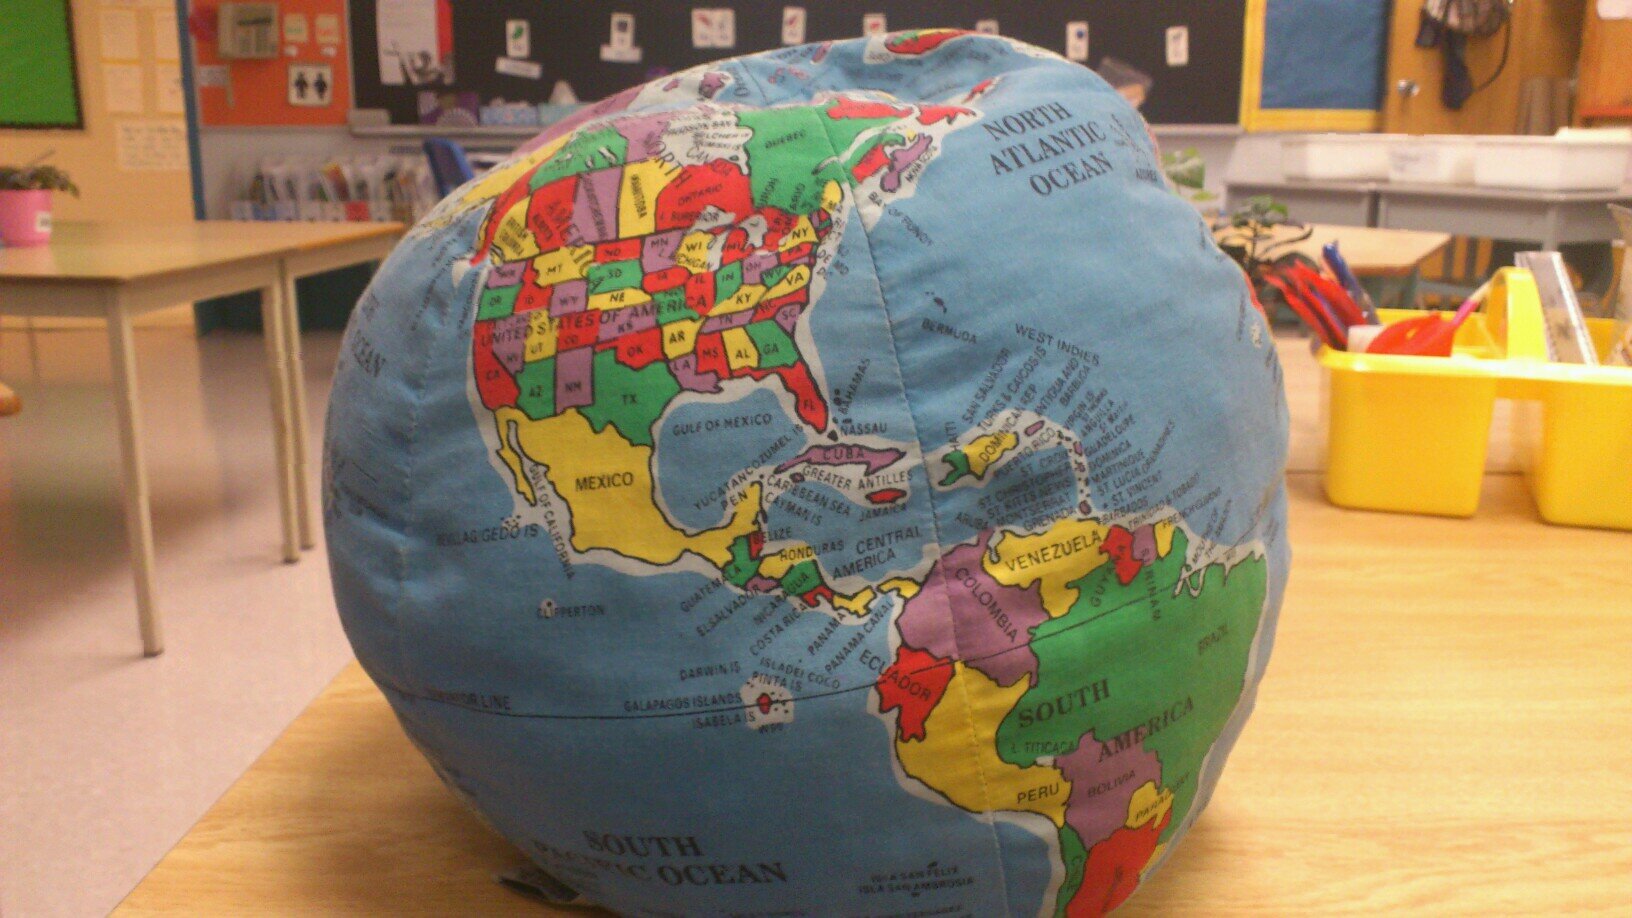 Grade 4/5 critical thinkers, innovators & change agents looking to connect with other classes in world. Global citizens that create positive digital footprints.